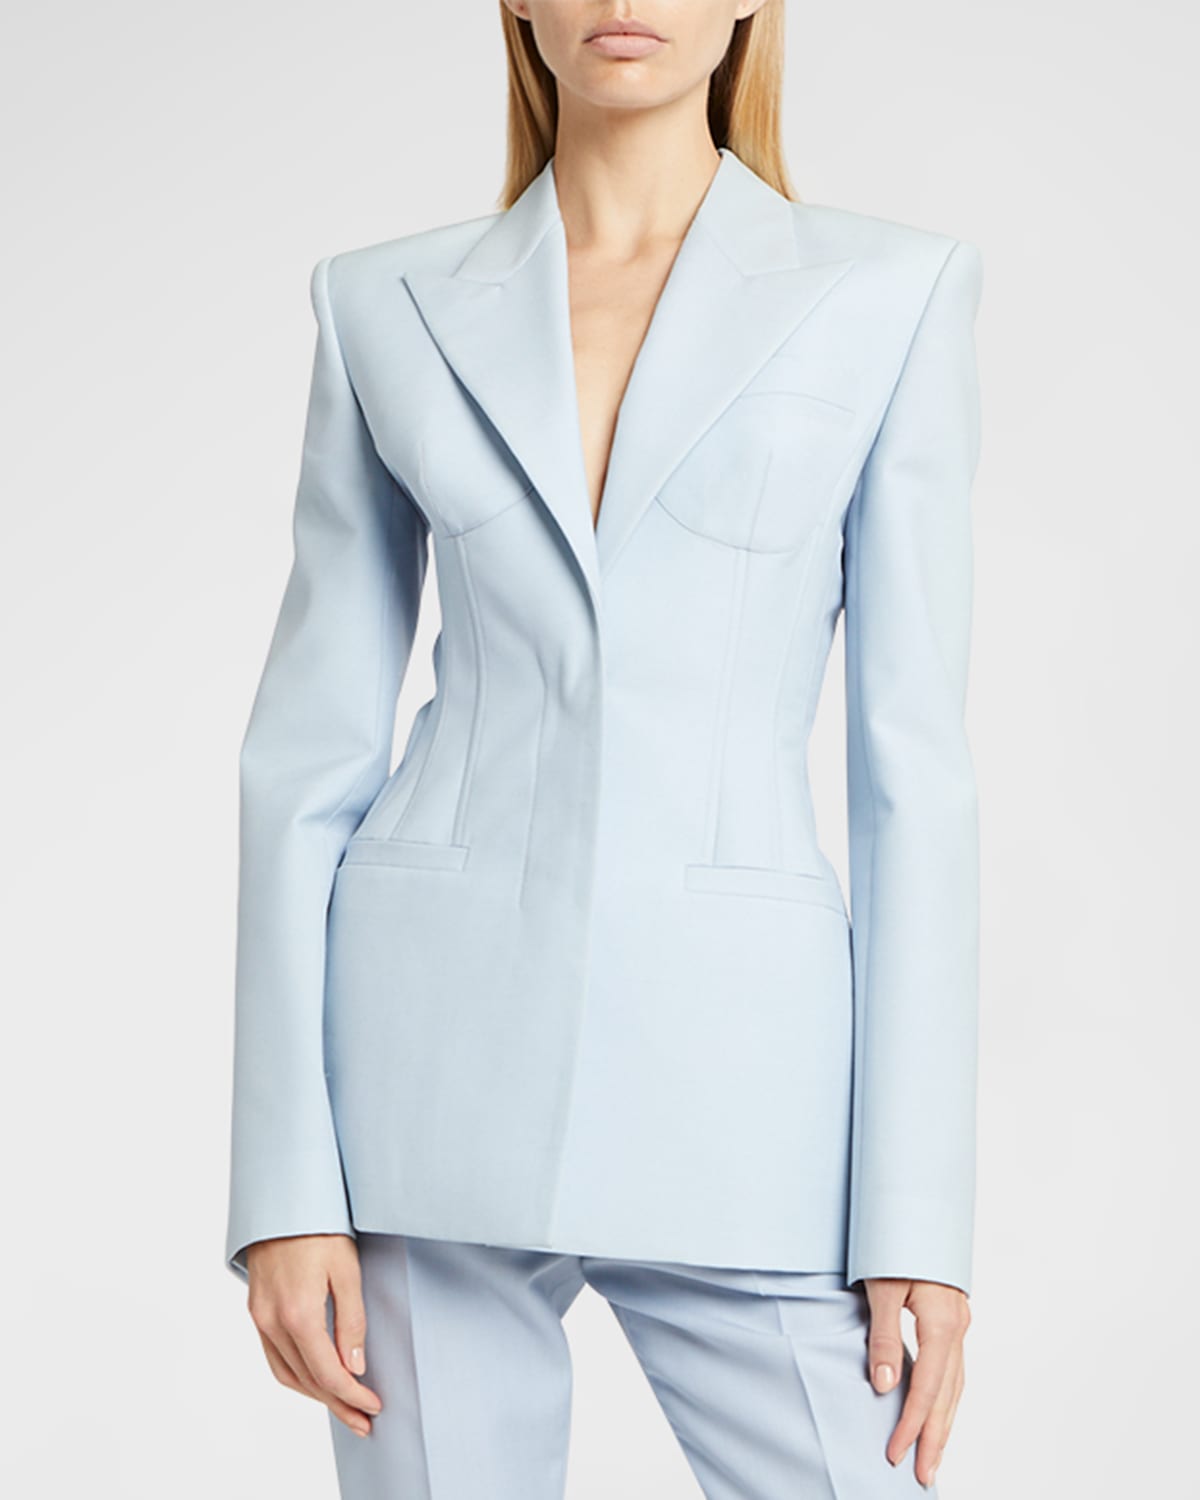 Givenchy Tailored Blazer Jacket With Bustier Seam Detail In Baby Blue